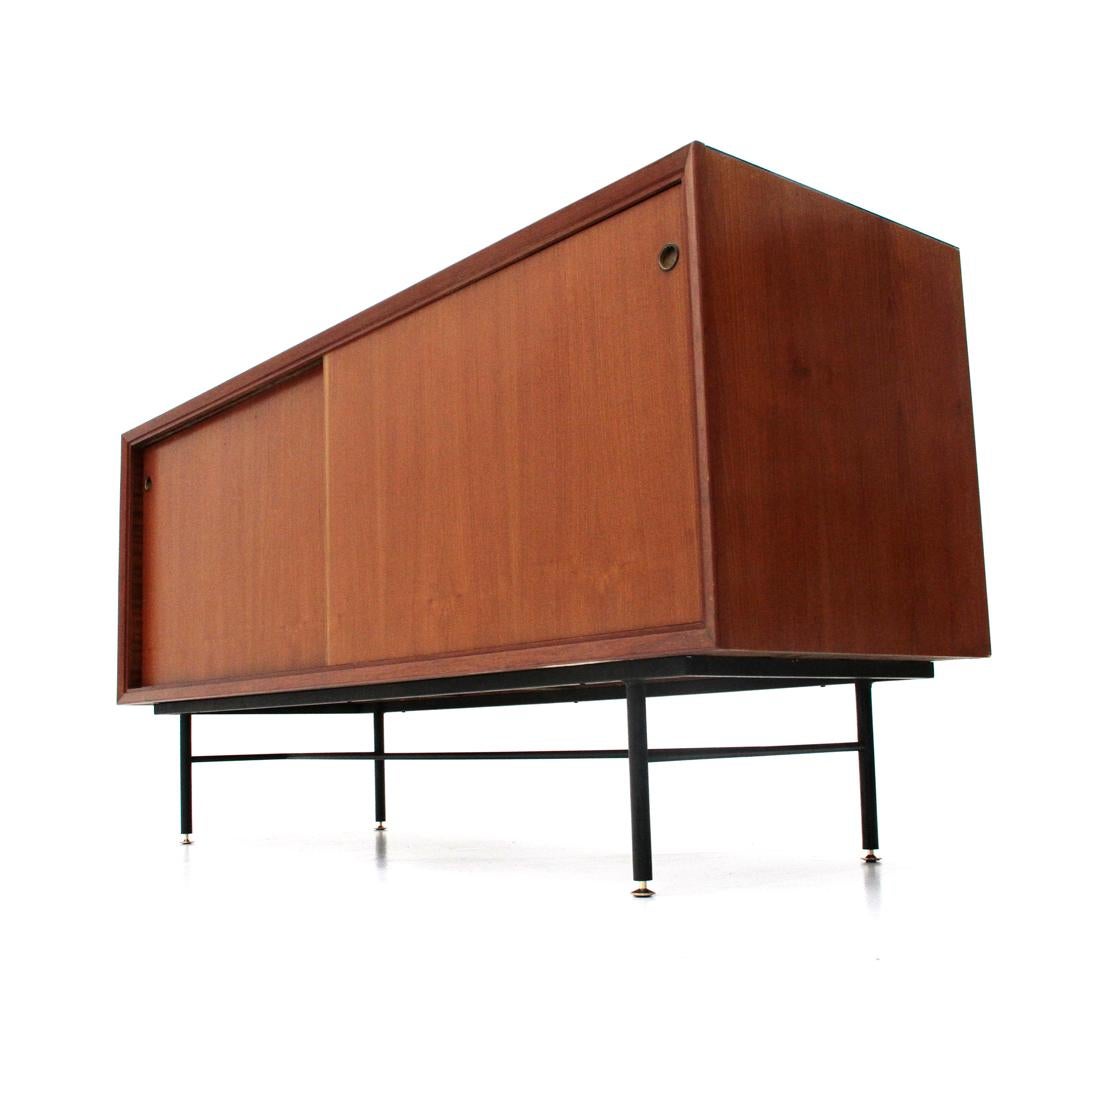 Italian manufacturing sideboard produced in the 1960s.
Veneered wood frame with solid wood front frames.
Upper top in black glass.
Sliding doors with brass handle.
Two compartments with shelf.
Legs in black painted metal with adjustable height